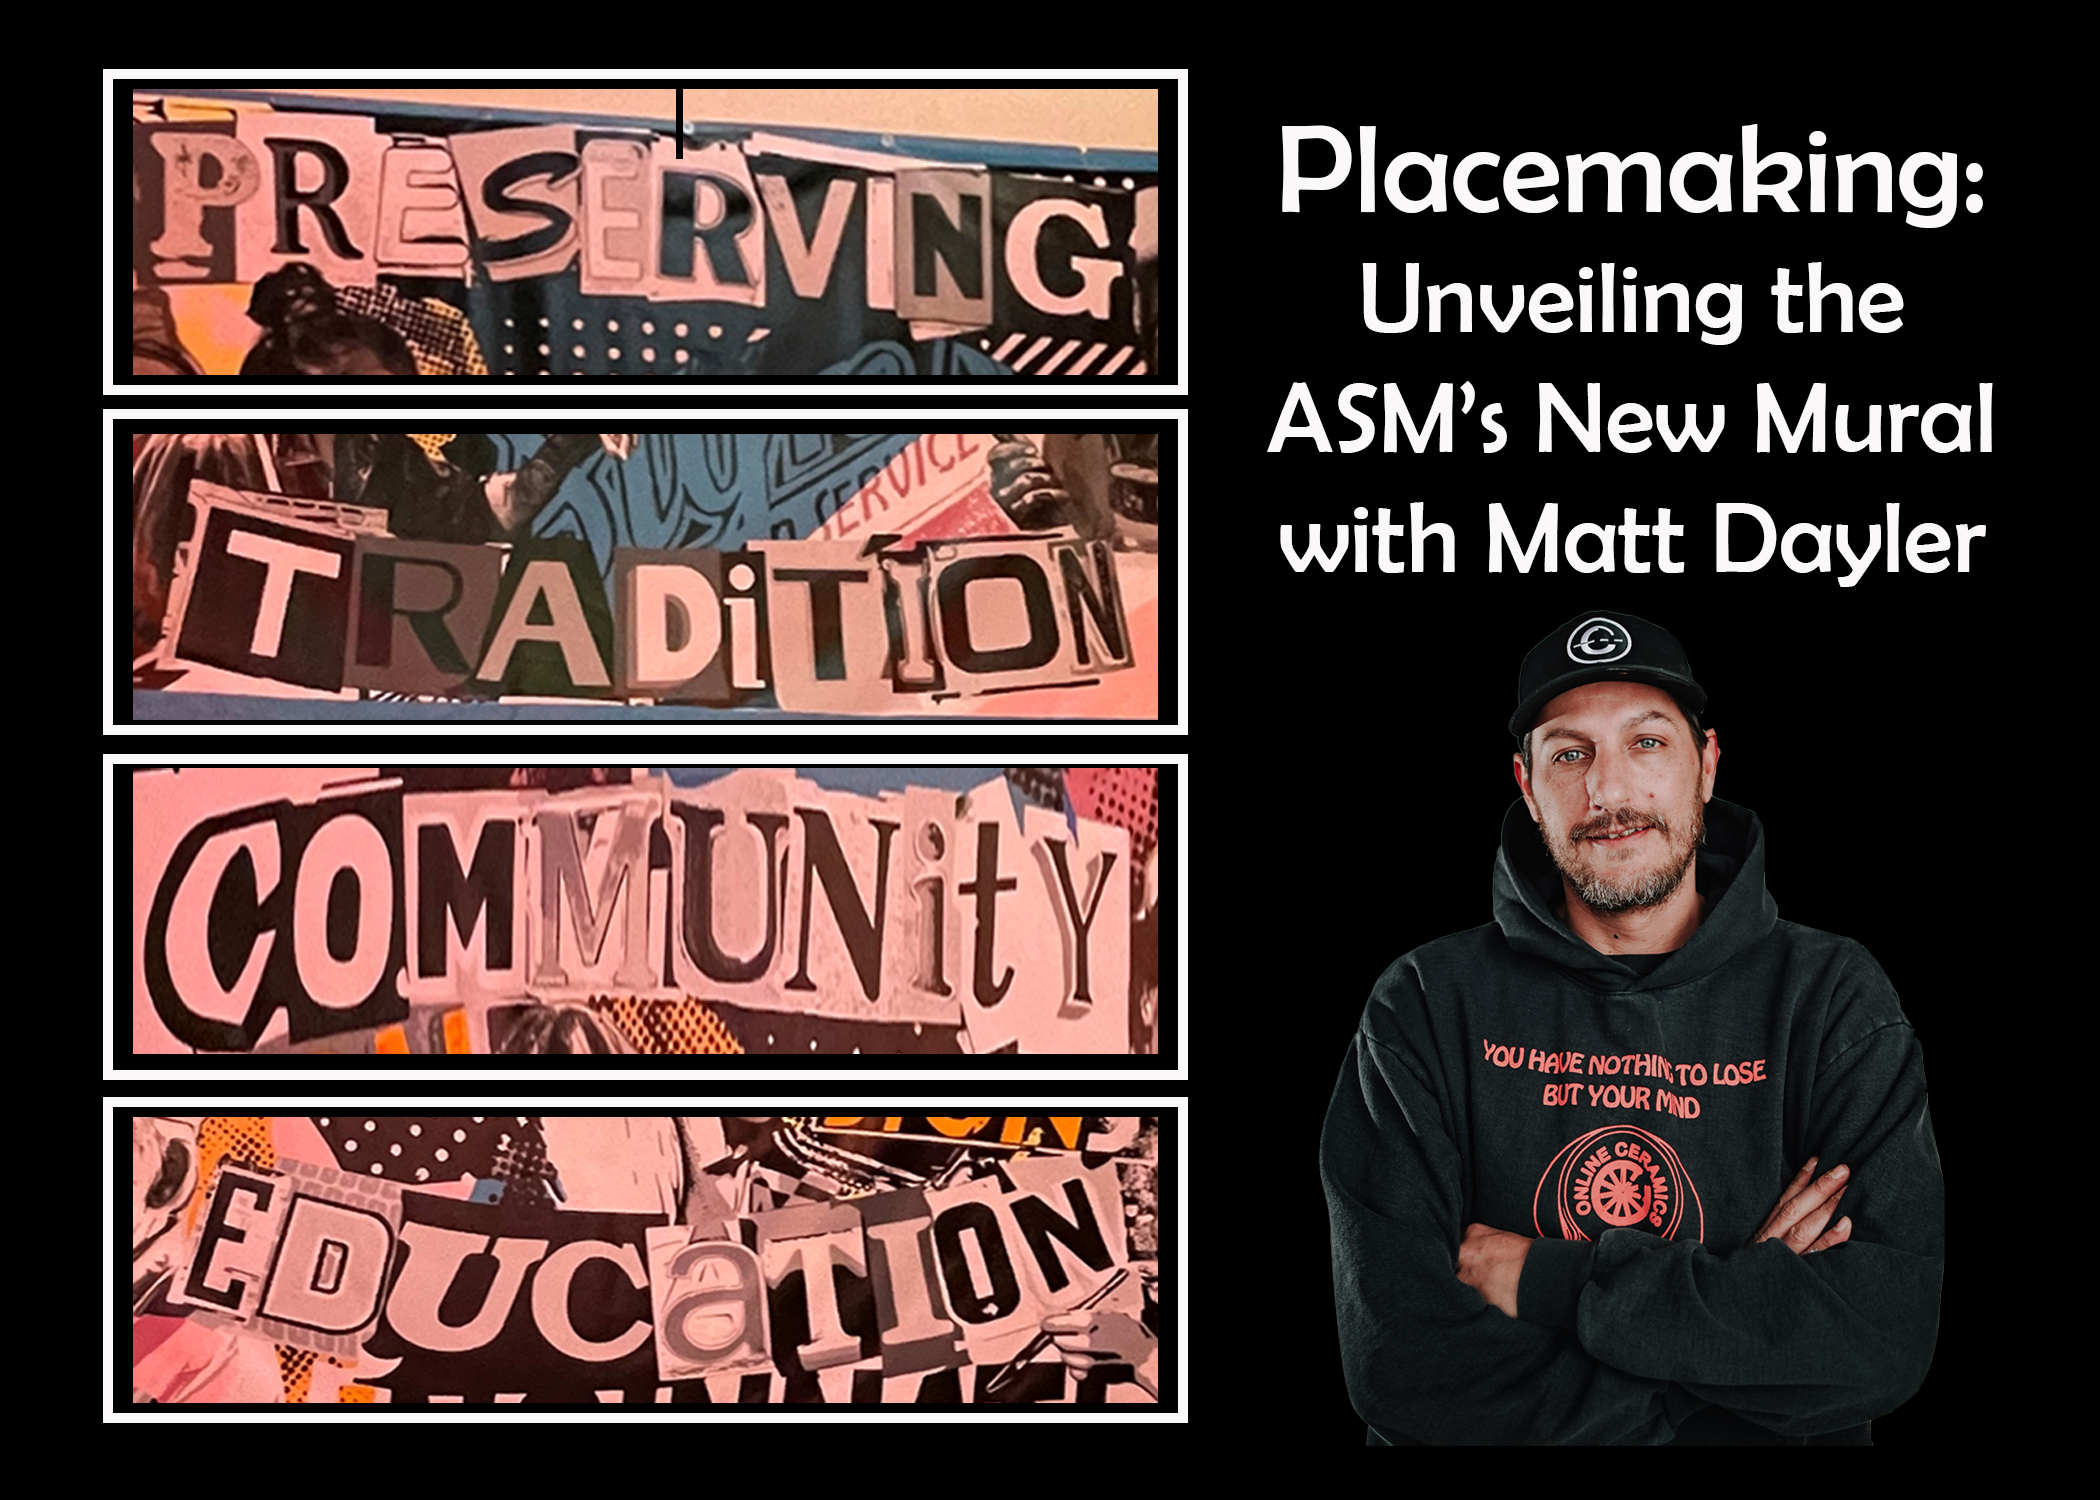 Placemaking: Unveiling the ASM's New Mural